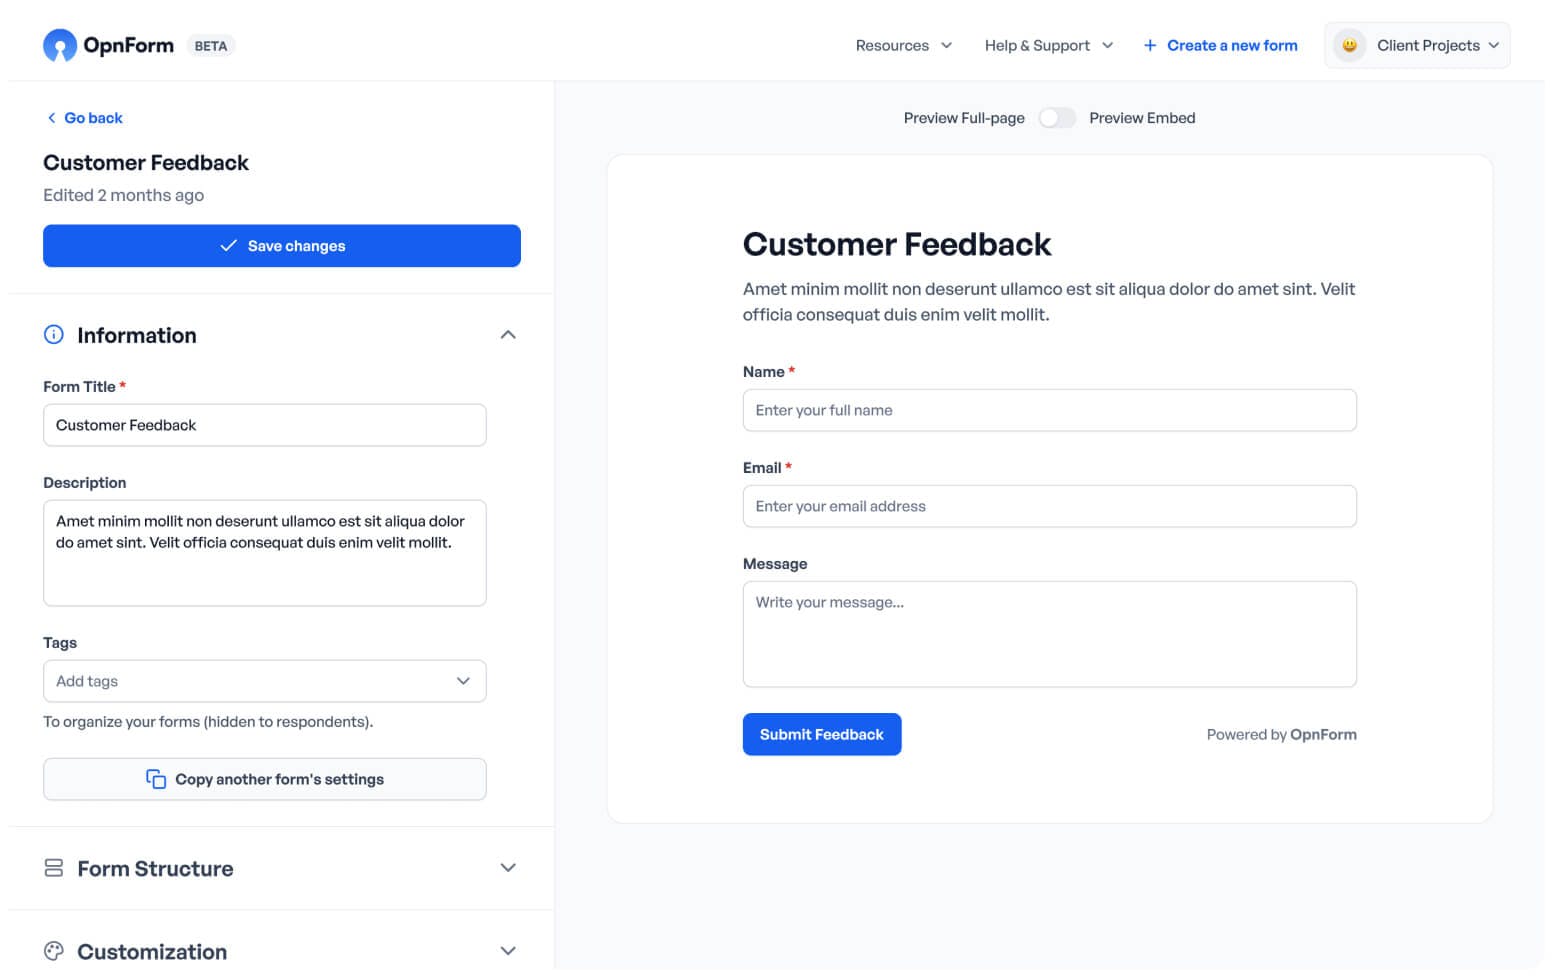 OpnForm is an open source form builder for experience management